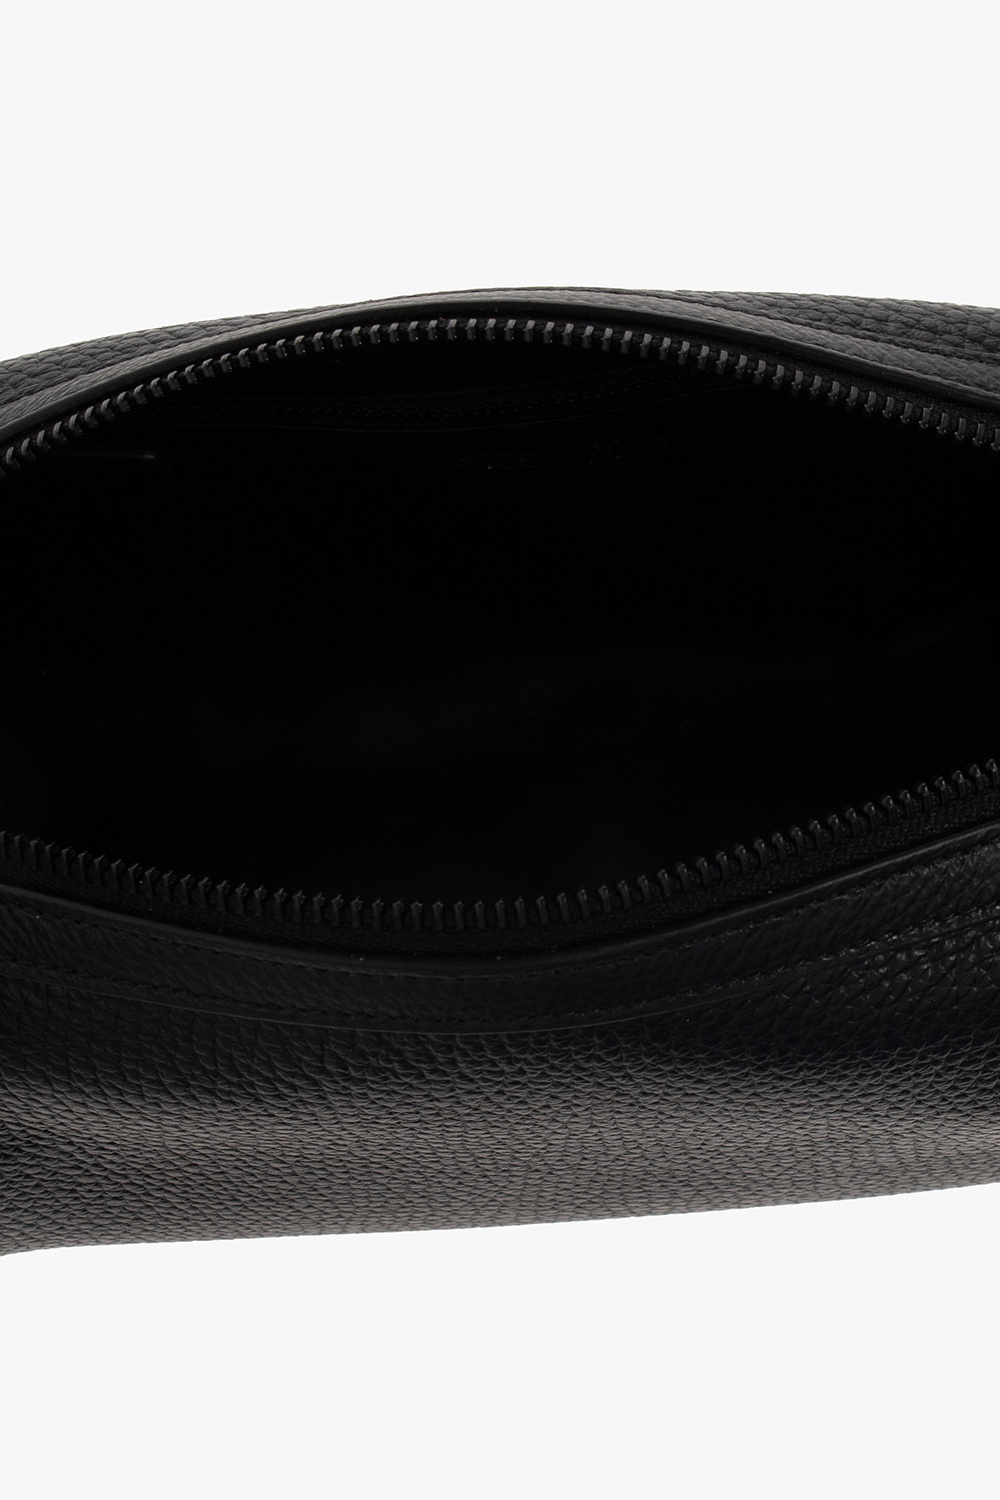 Common Projects Leather wash bag with logo